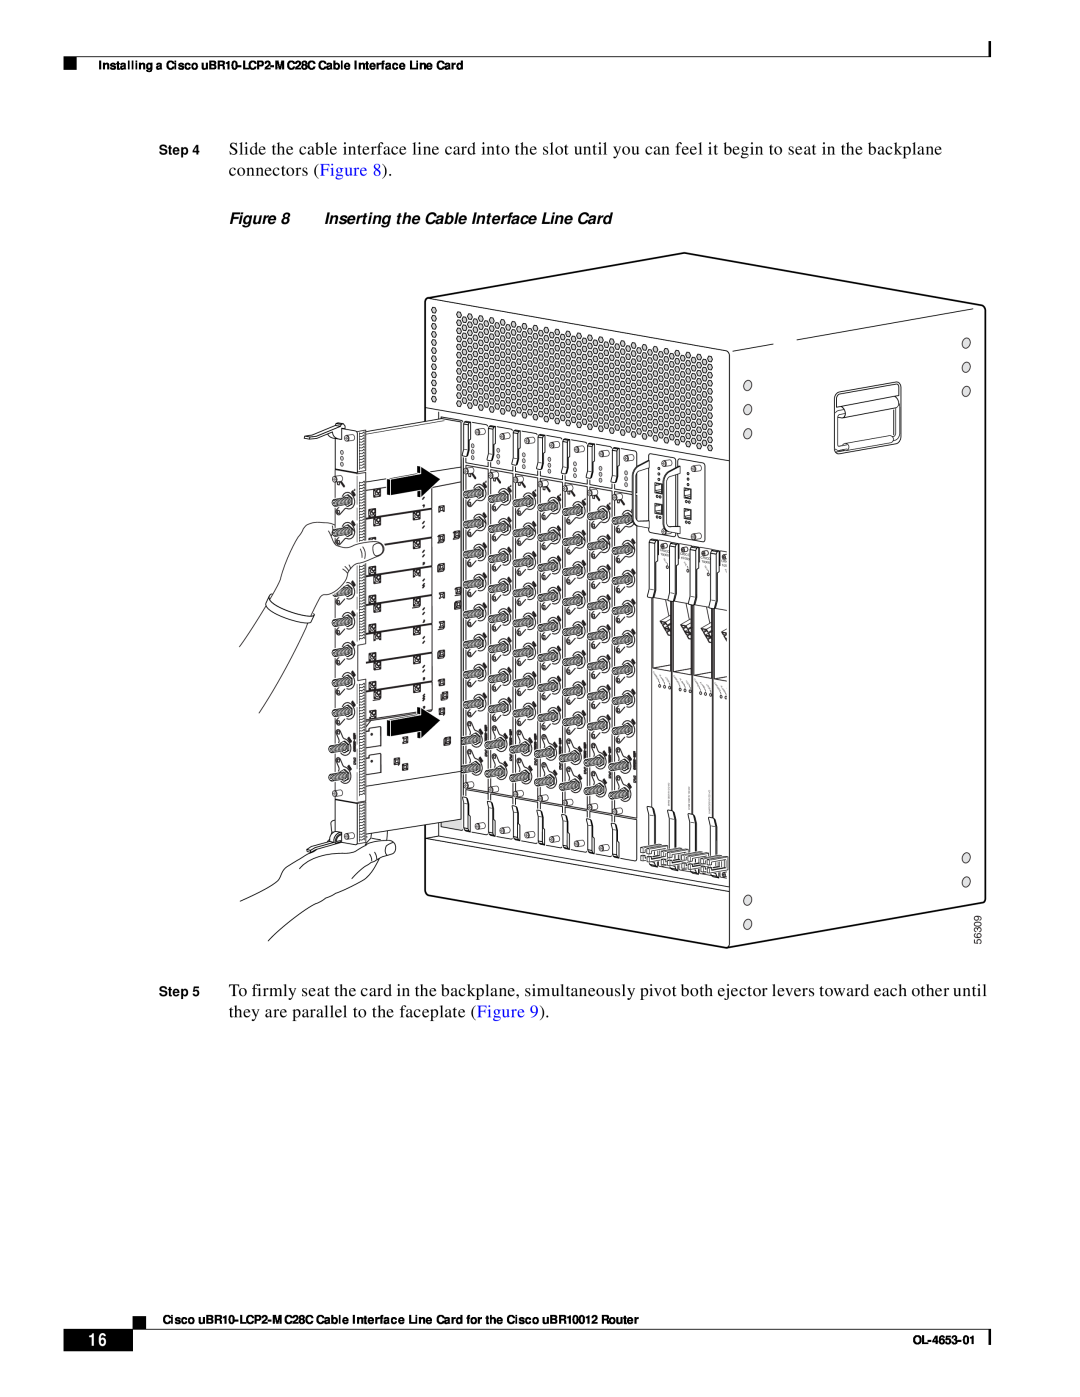 Cisco Systems uBR10-LCP2-MC28C manual Inserting the Cable Interface Line Card, OL-4653-01 